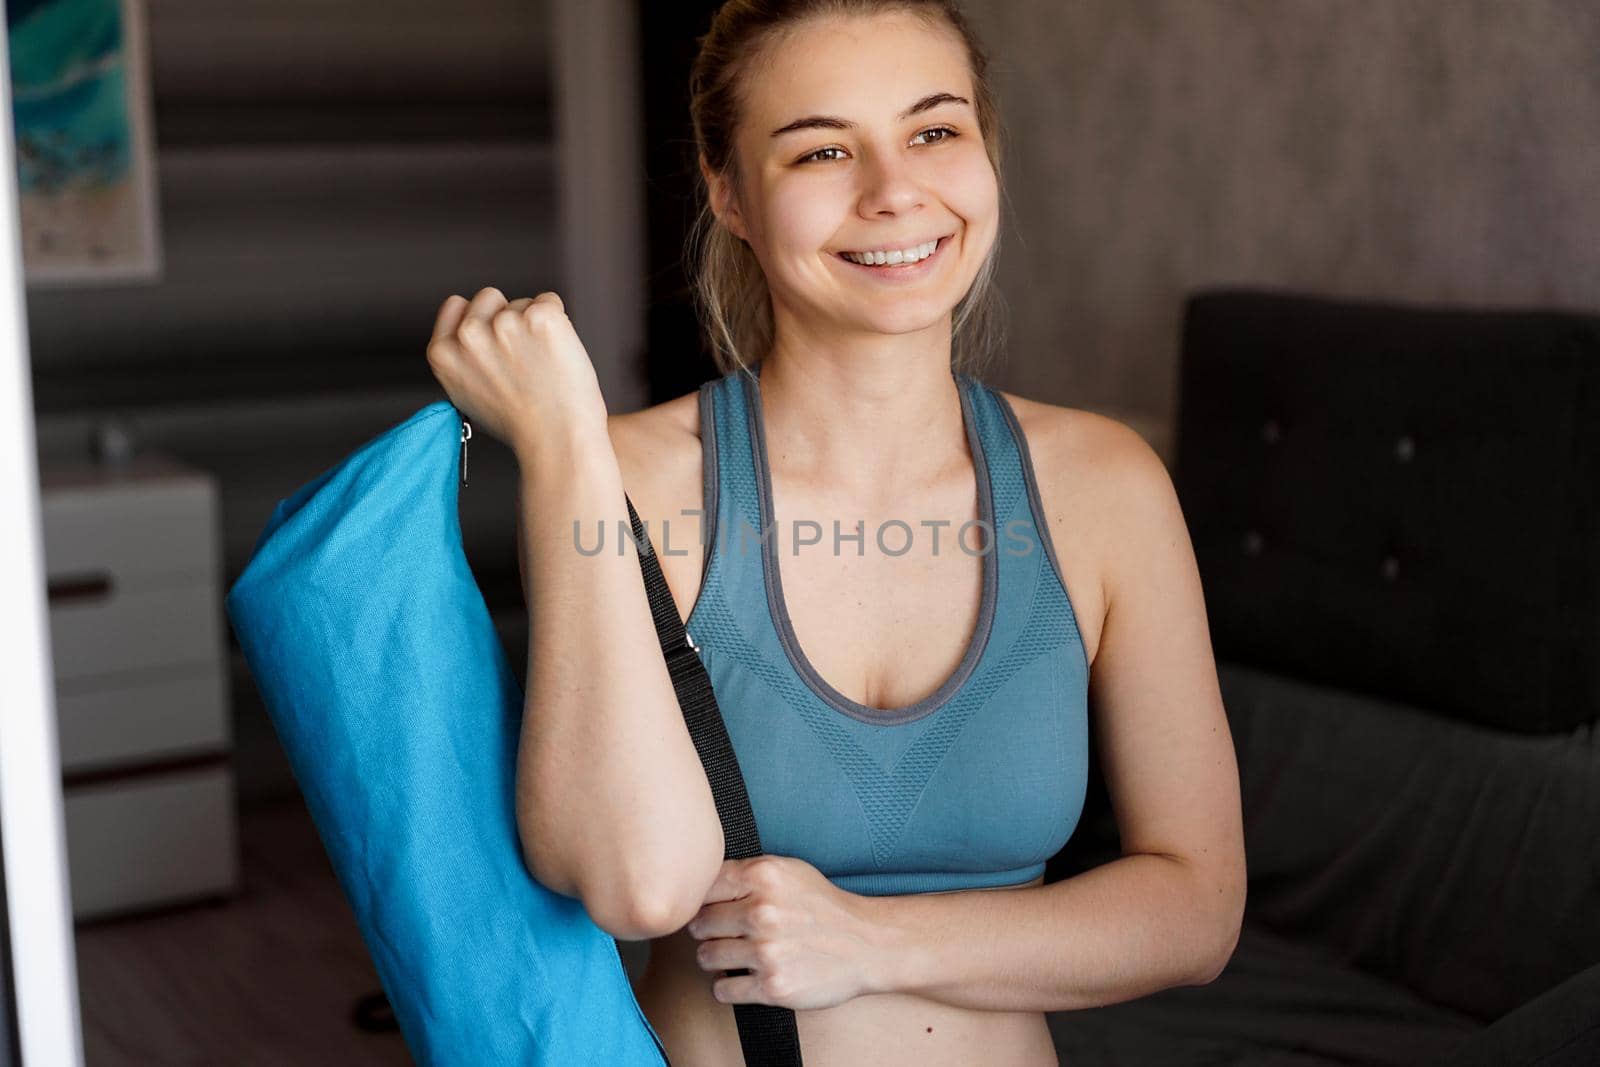 Portrait of an athletic happy young woman. She is going to workout, yoga mat case in hand